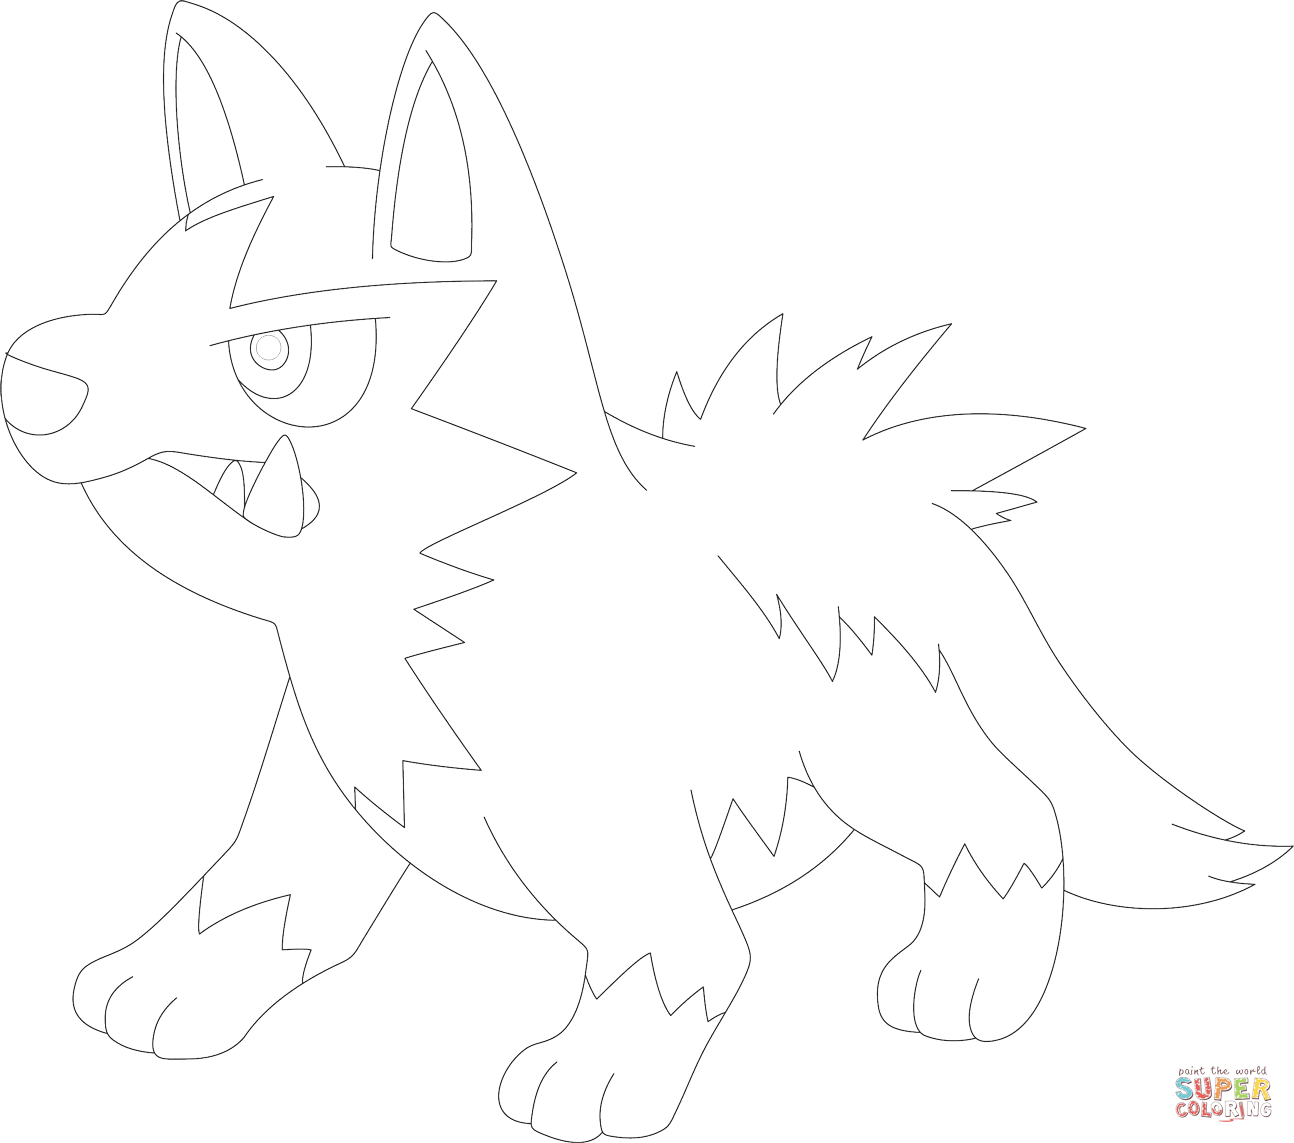 Poochyena coloring page | Free Printable Coloring Pages